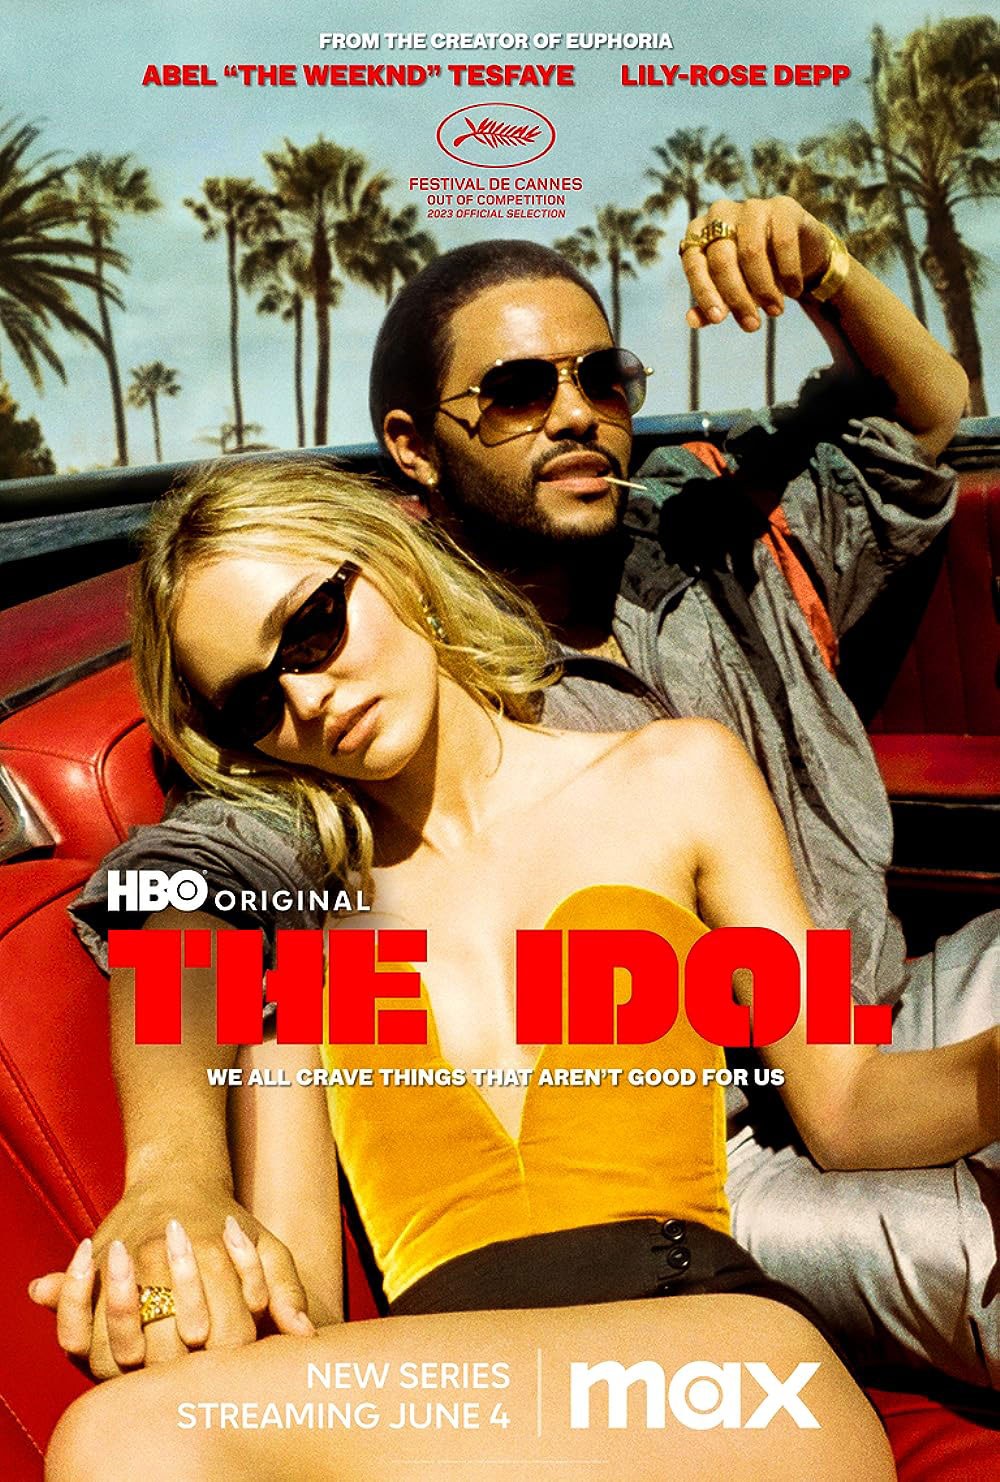 The Idol film poster